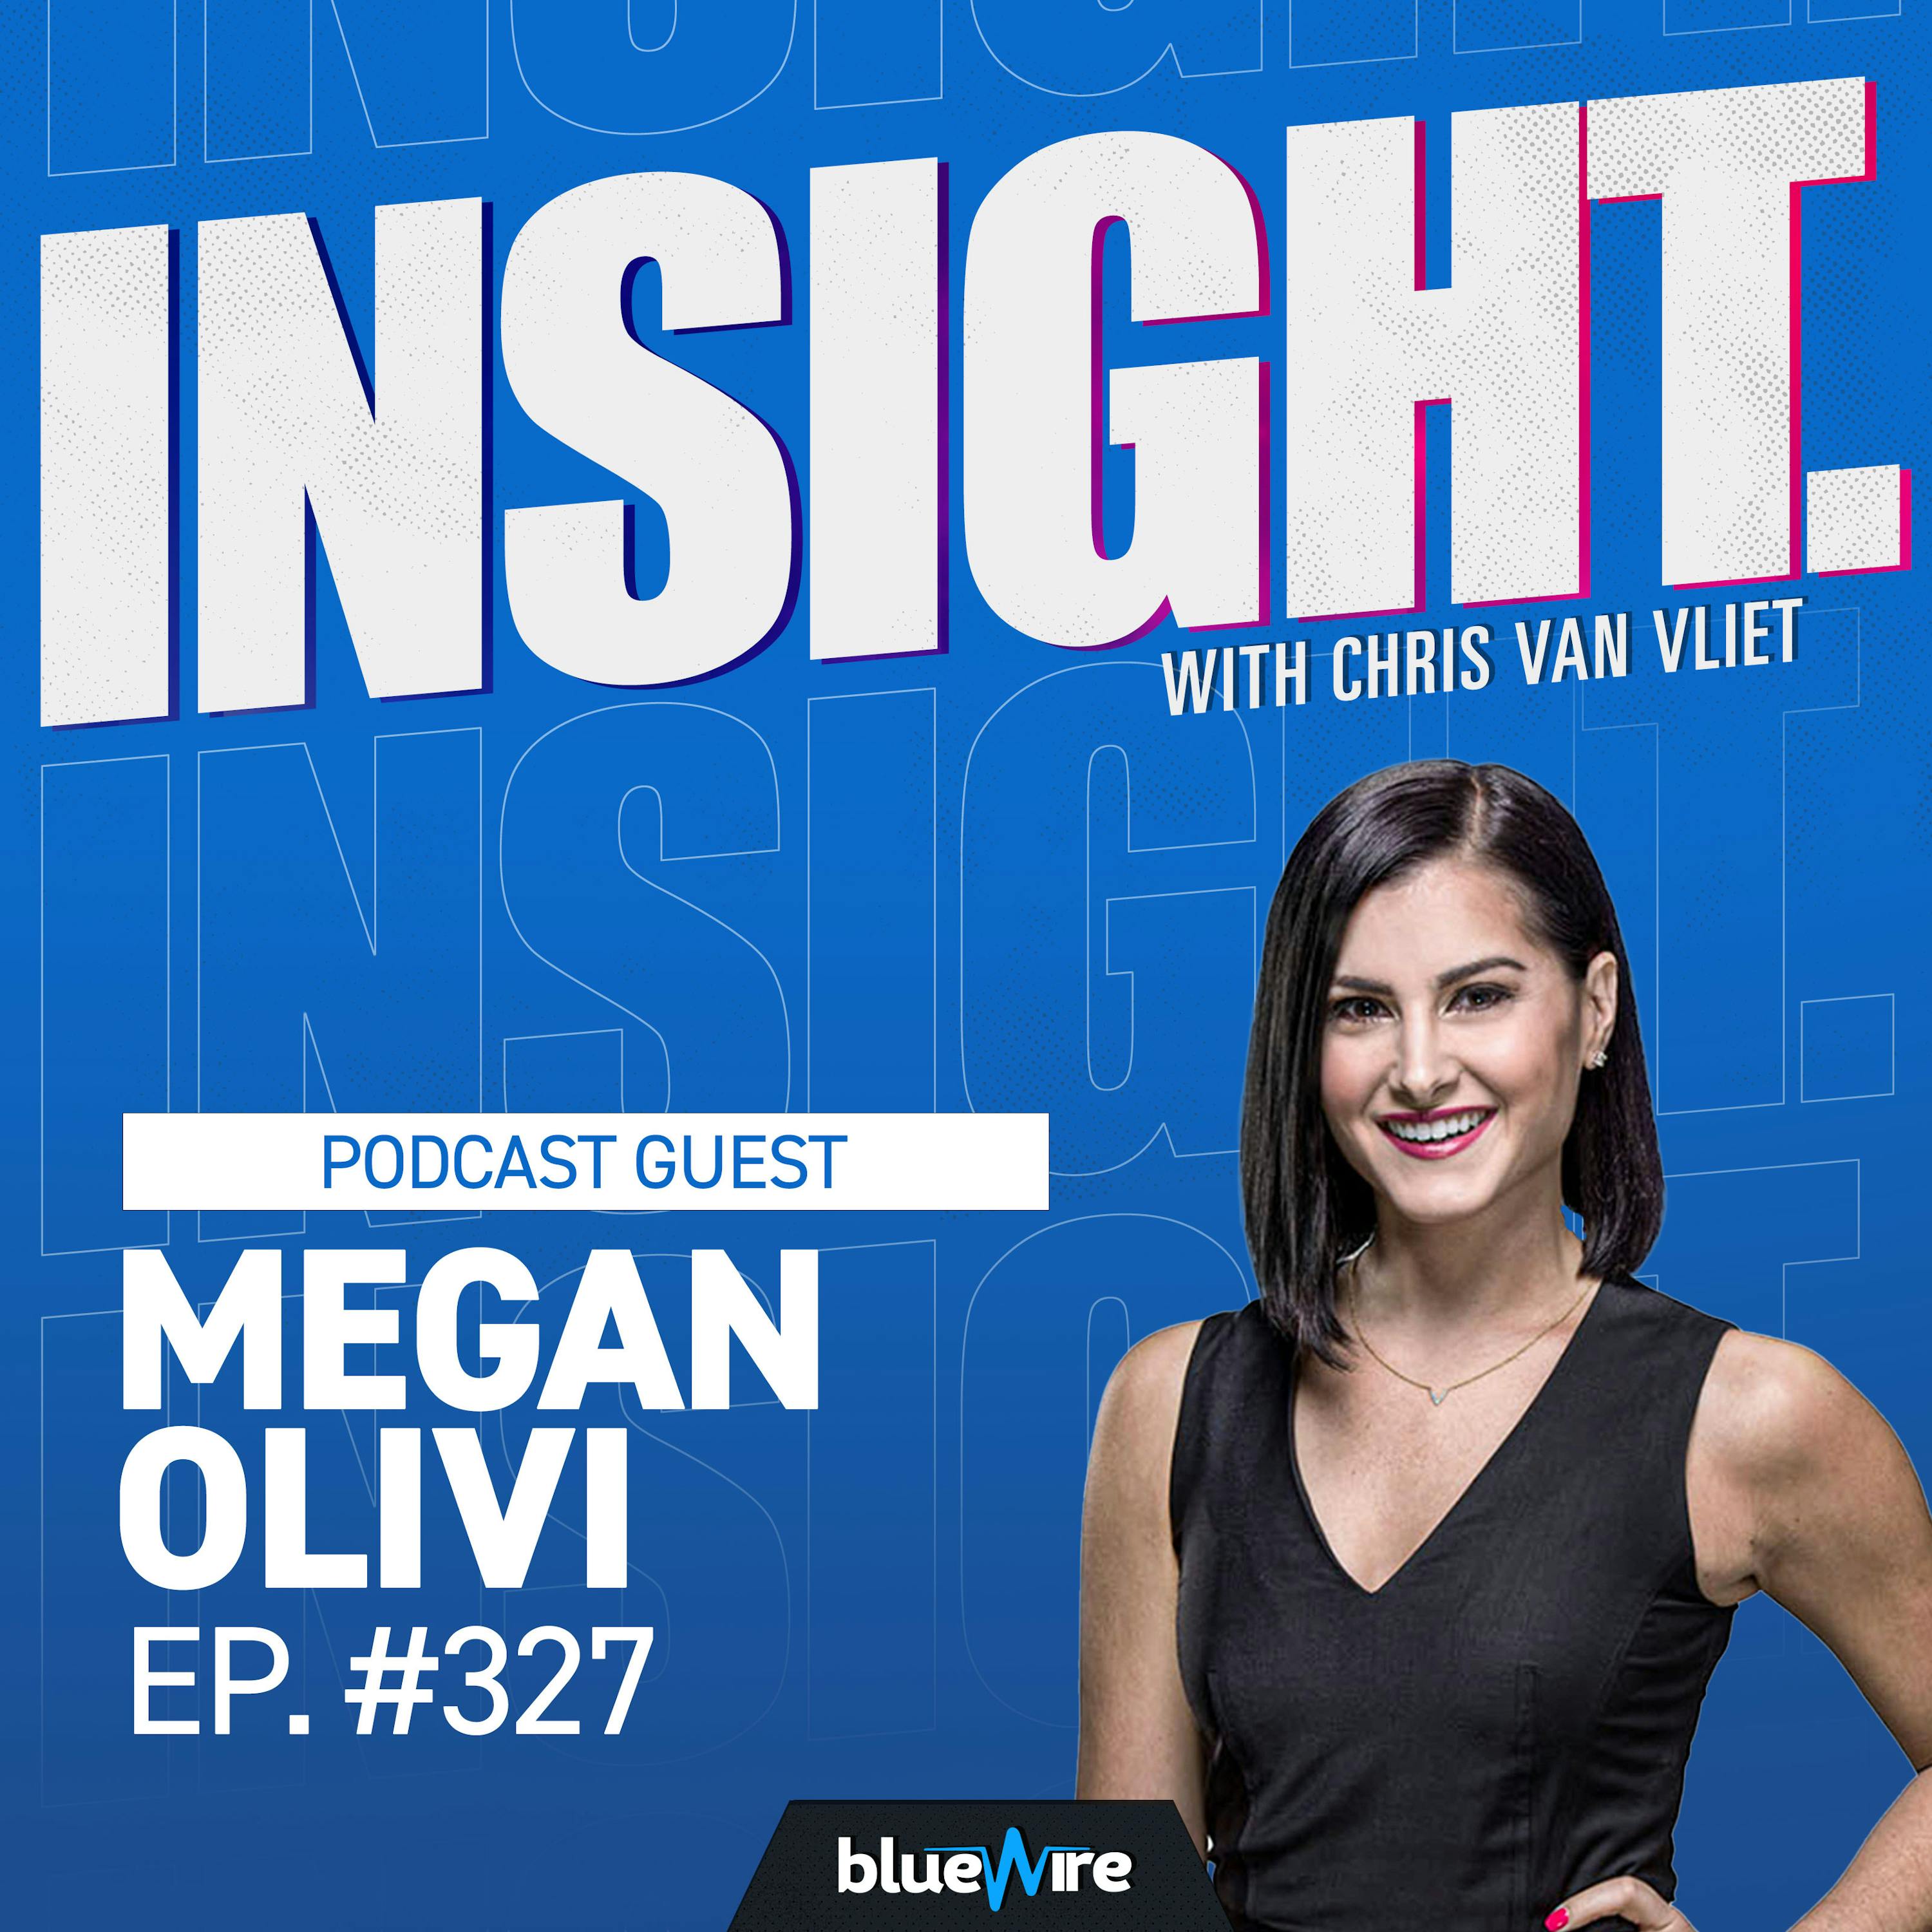 Behind The Scenes Of UFC With Megan Olivi - What She's Learned From Working With Dana White, Conor McGregor & Ronda Rousey